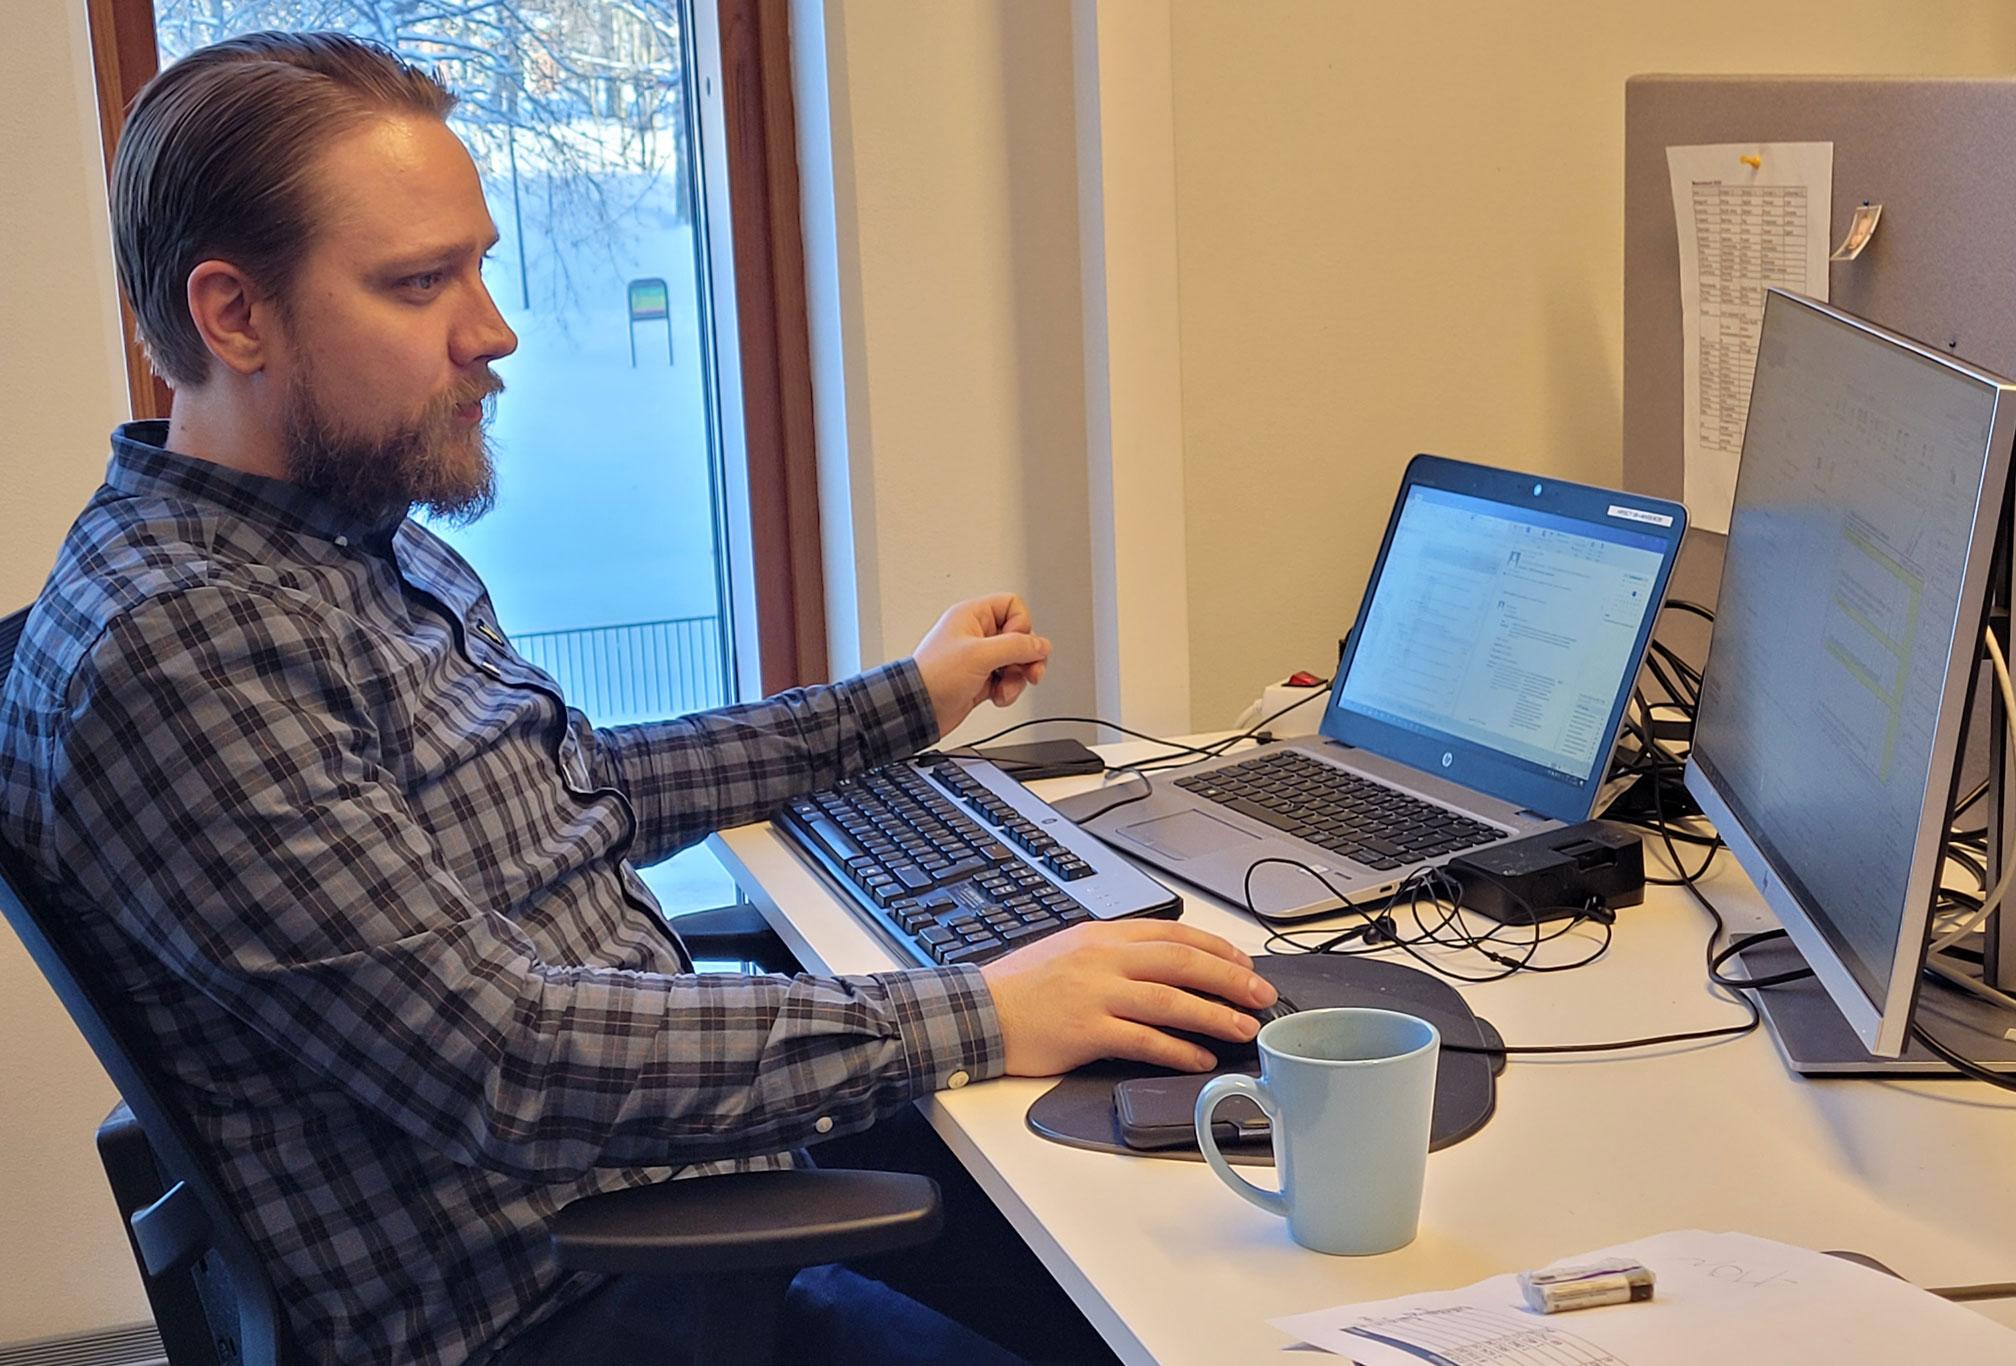 Arttu Halonen - Manager for Quality Management Systems